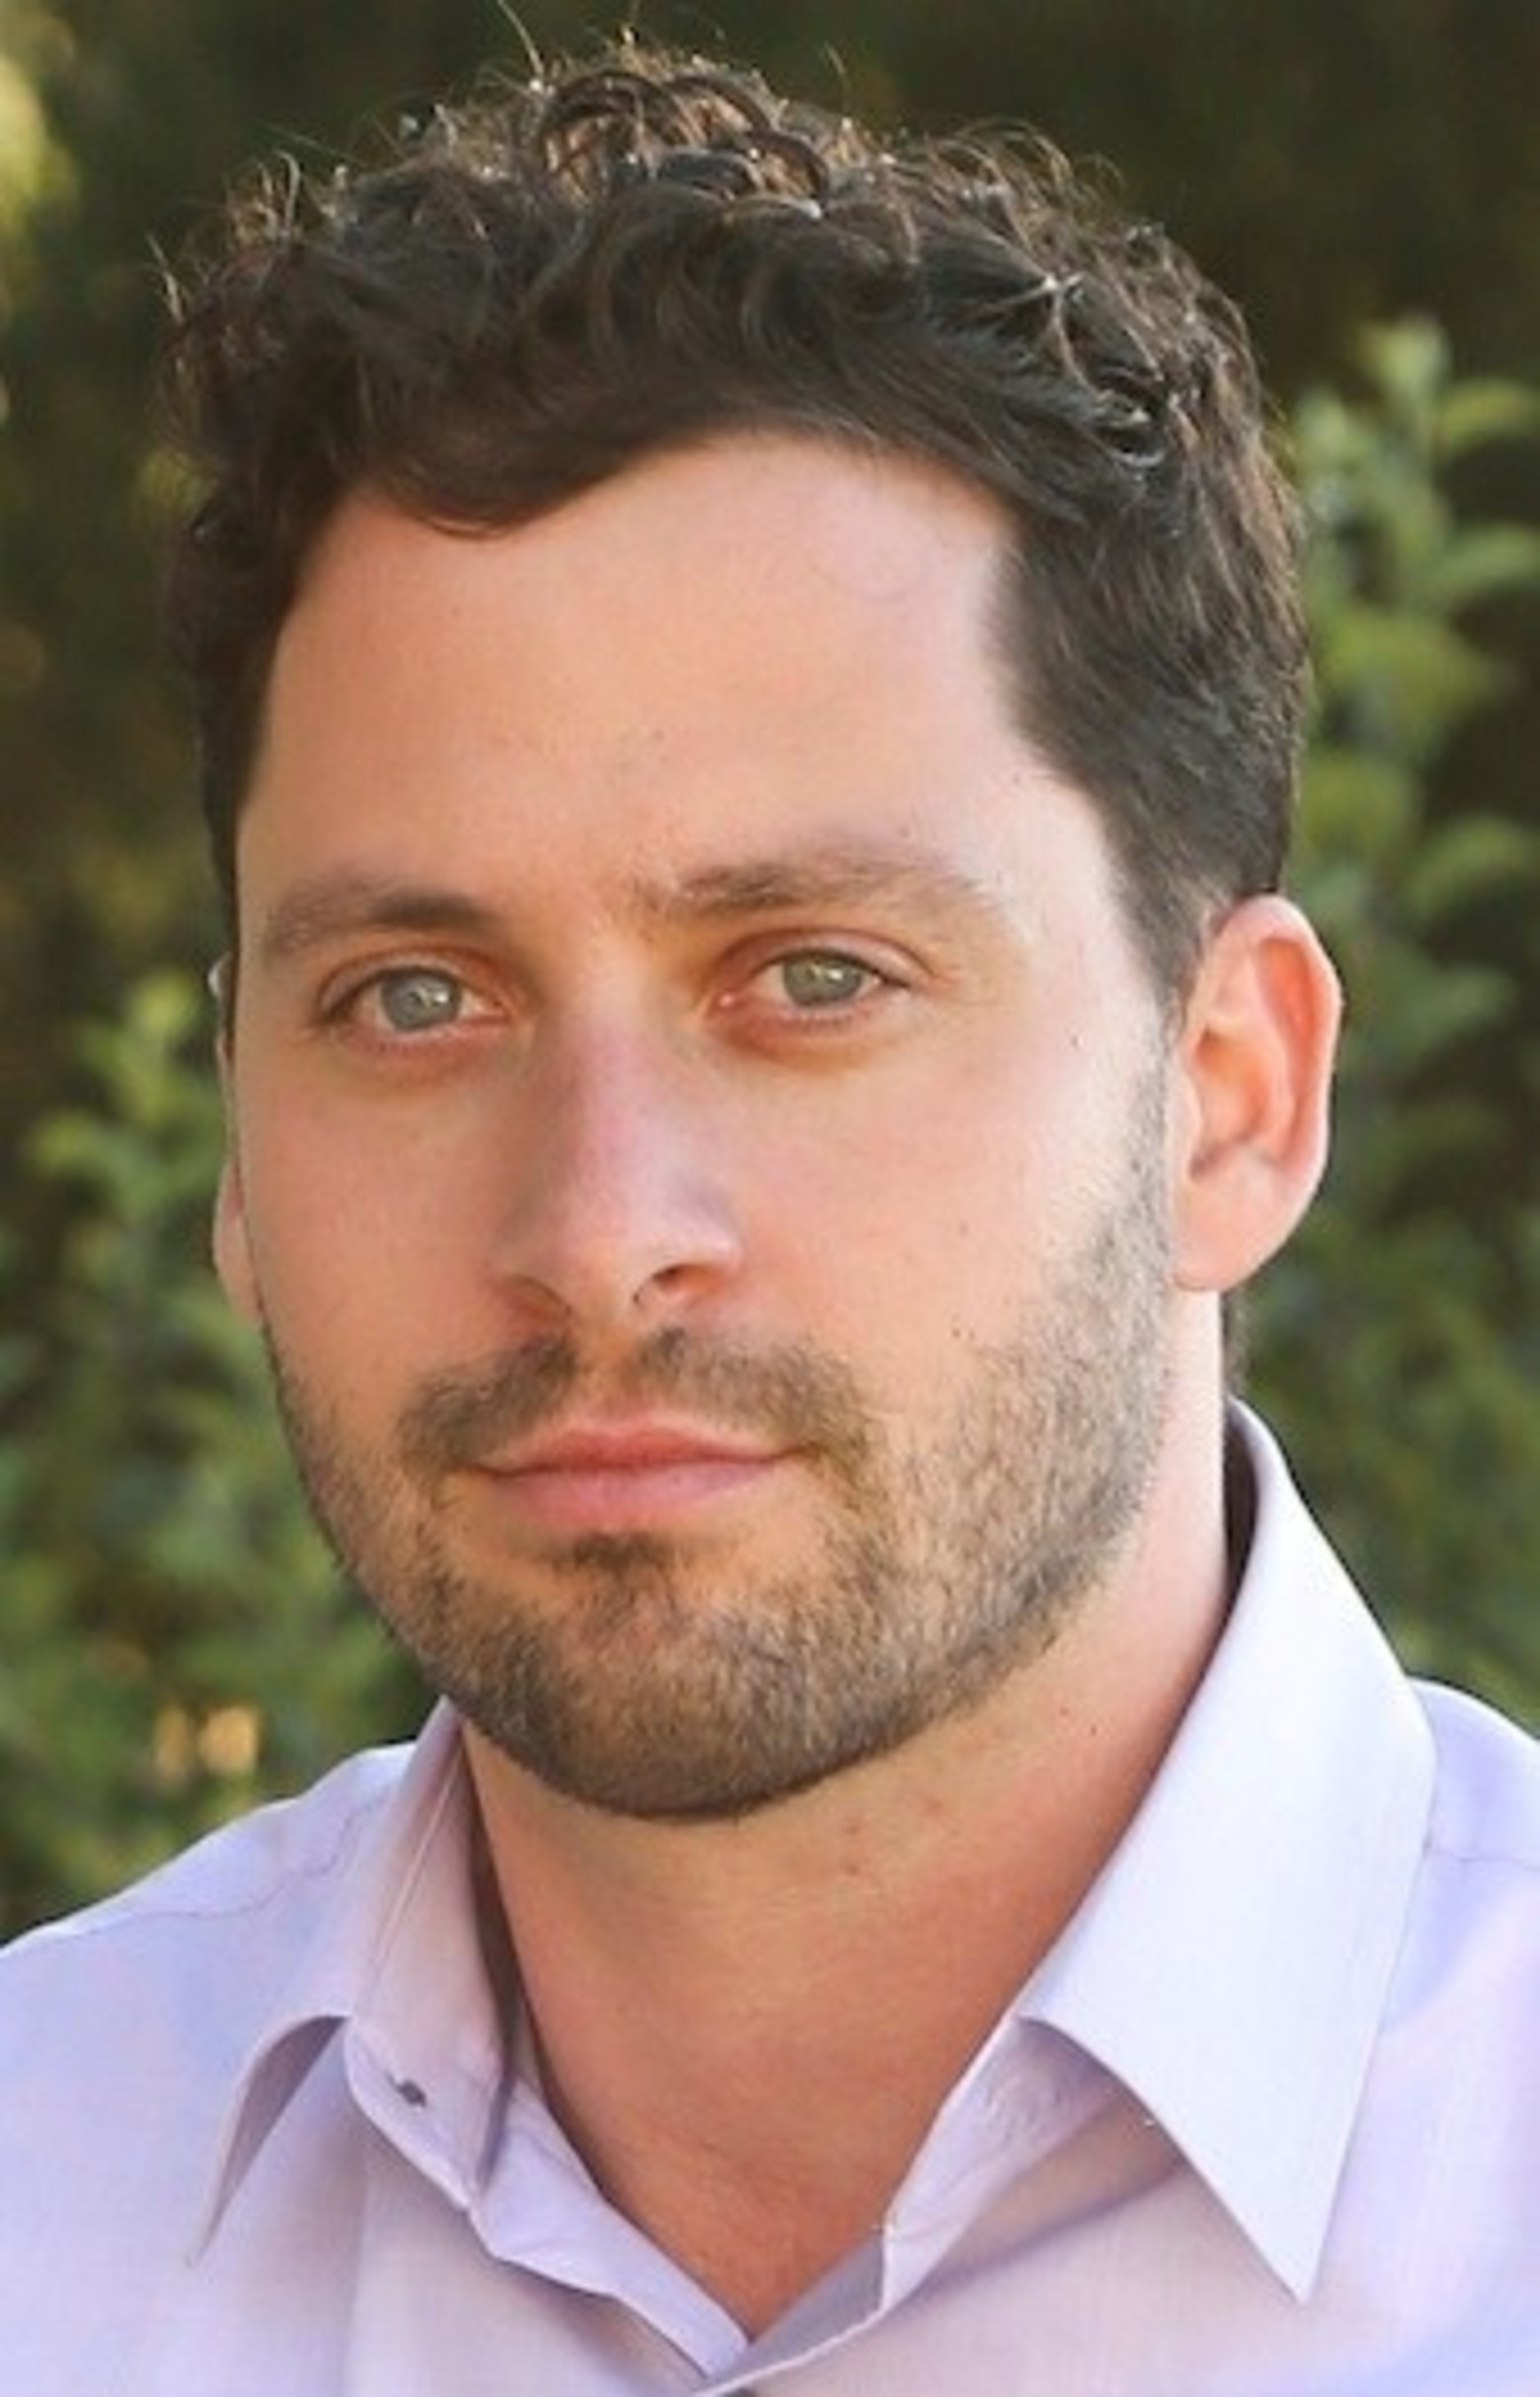 Nicholas Weiss Joins Sony Pictures Entertainment As Senior Vice President, Creative Advertising